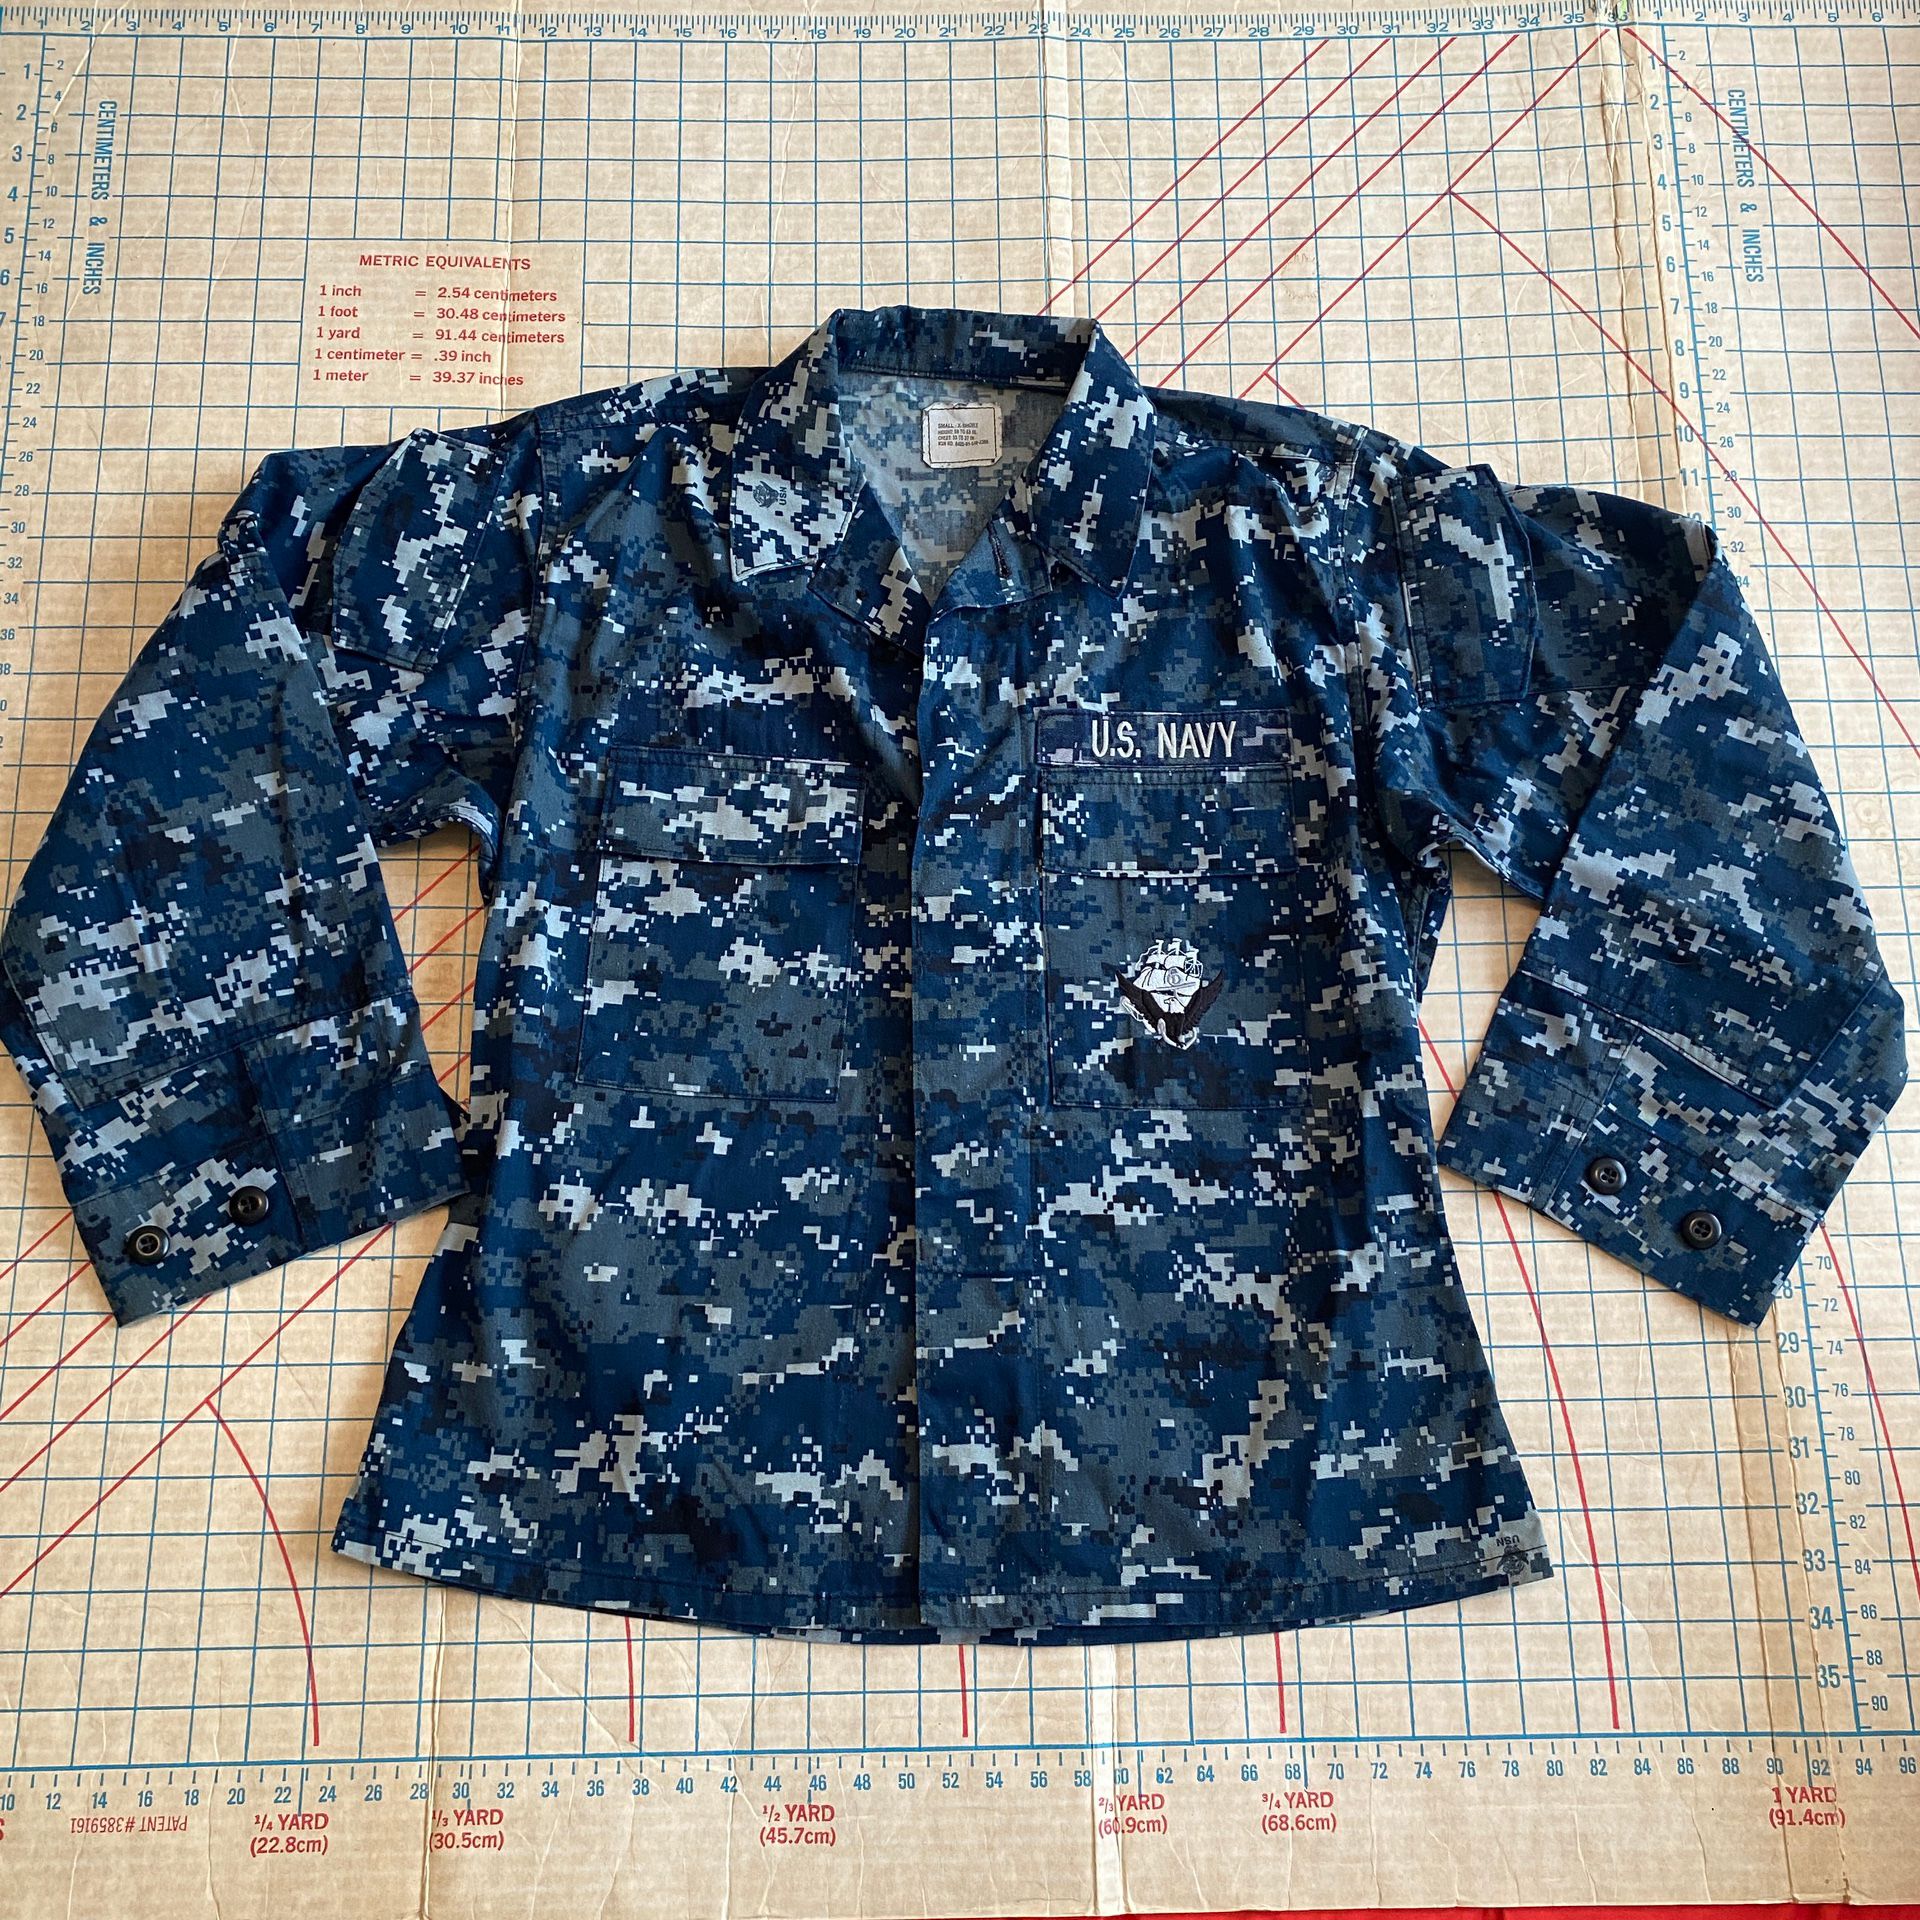 US Navy Digital Camo Shirt Blue Small X-Short Height 59-63 Inches Chest 33-37